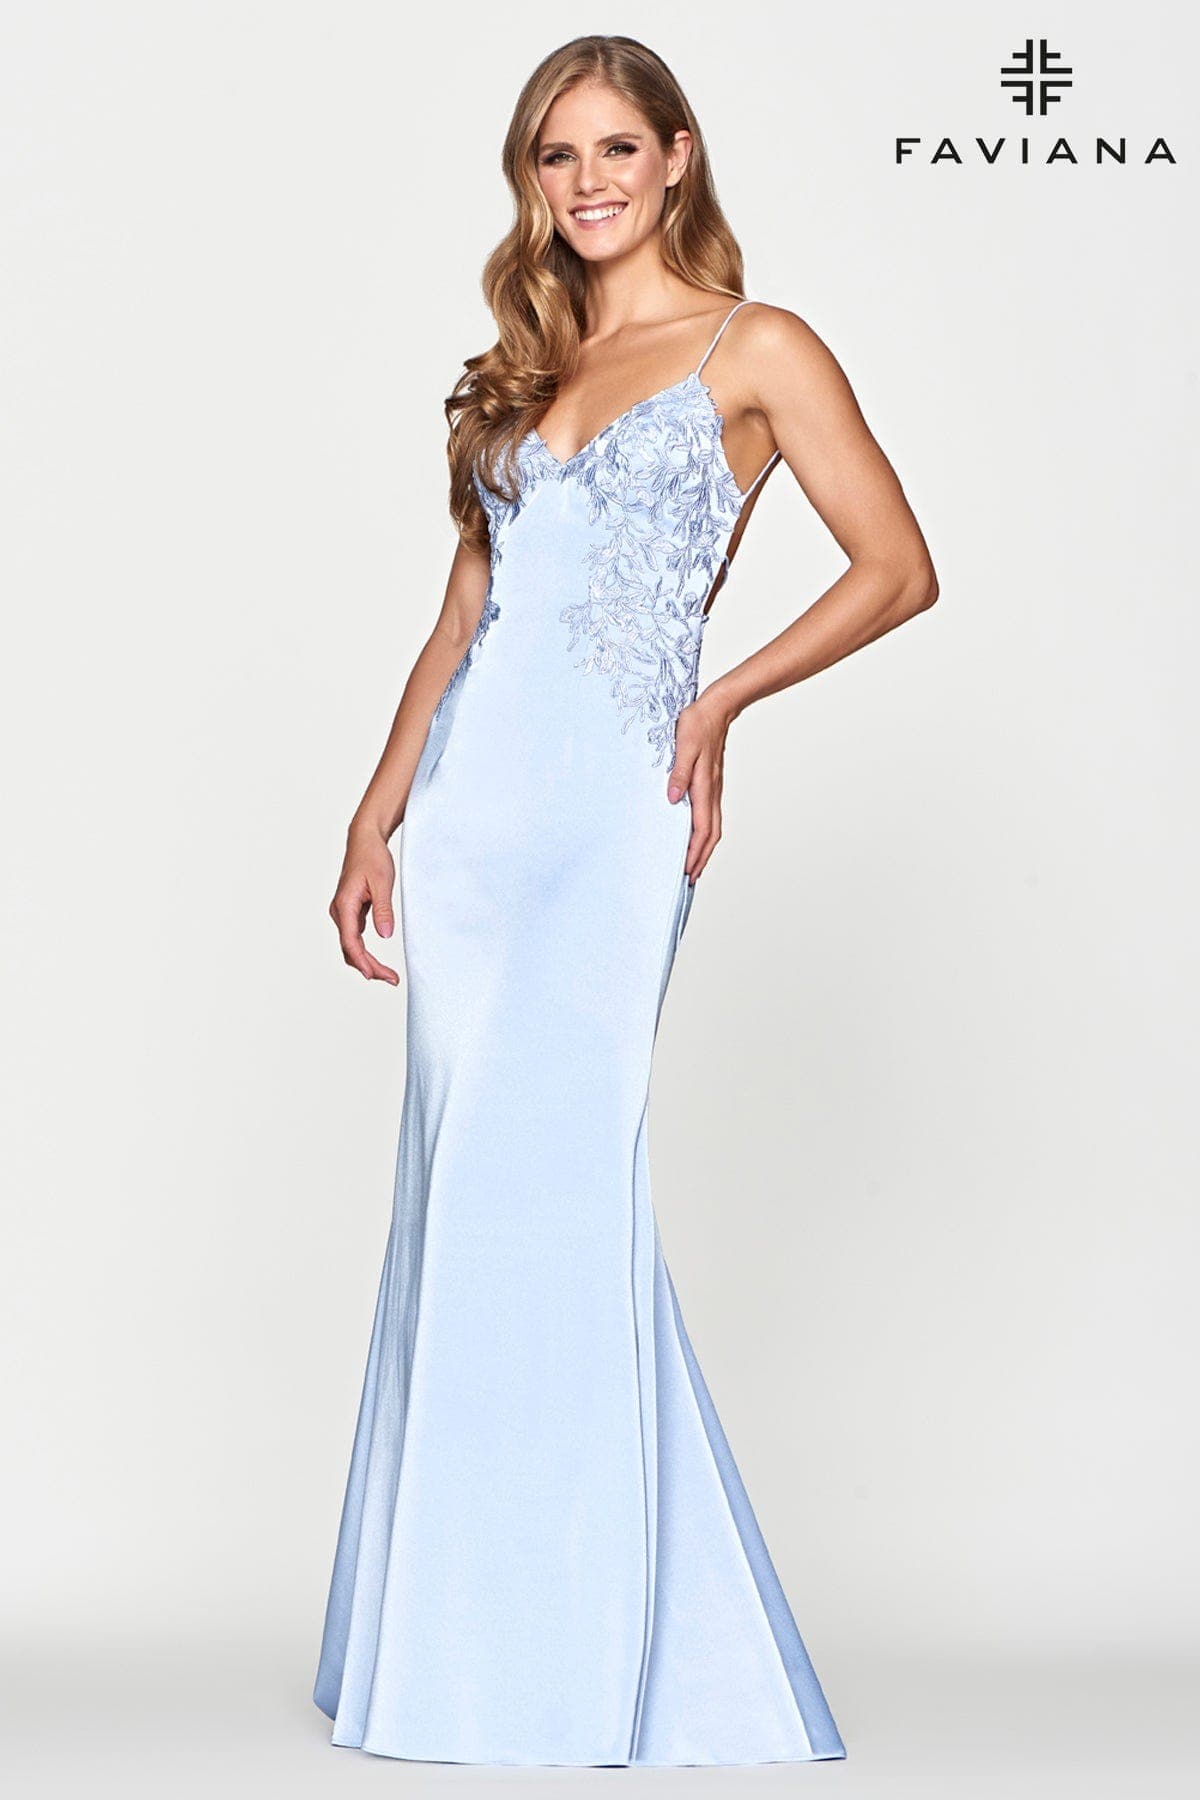 Lace Applique V Neck Prom Dress With Lace Up Back | Faviana